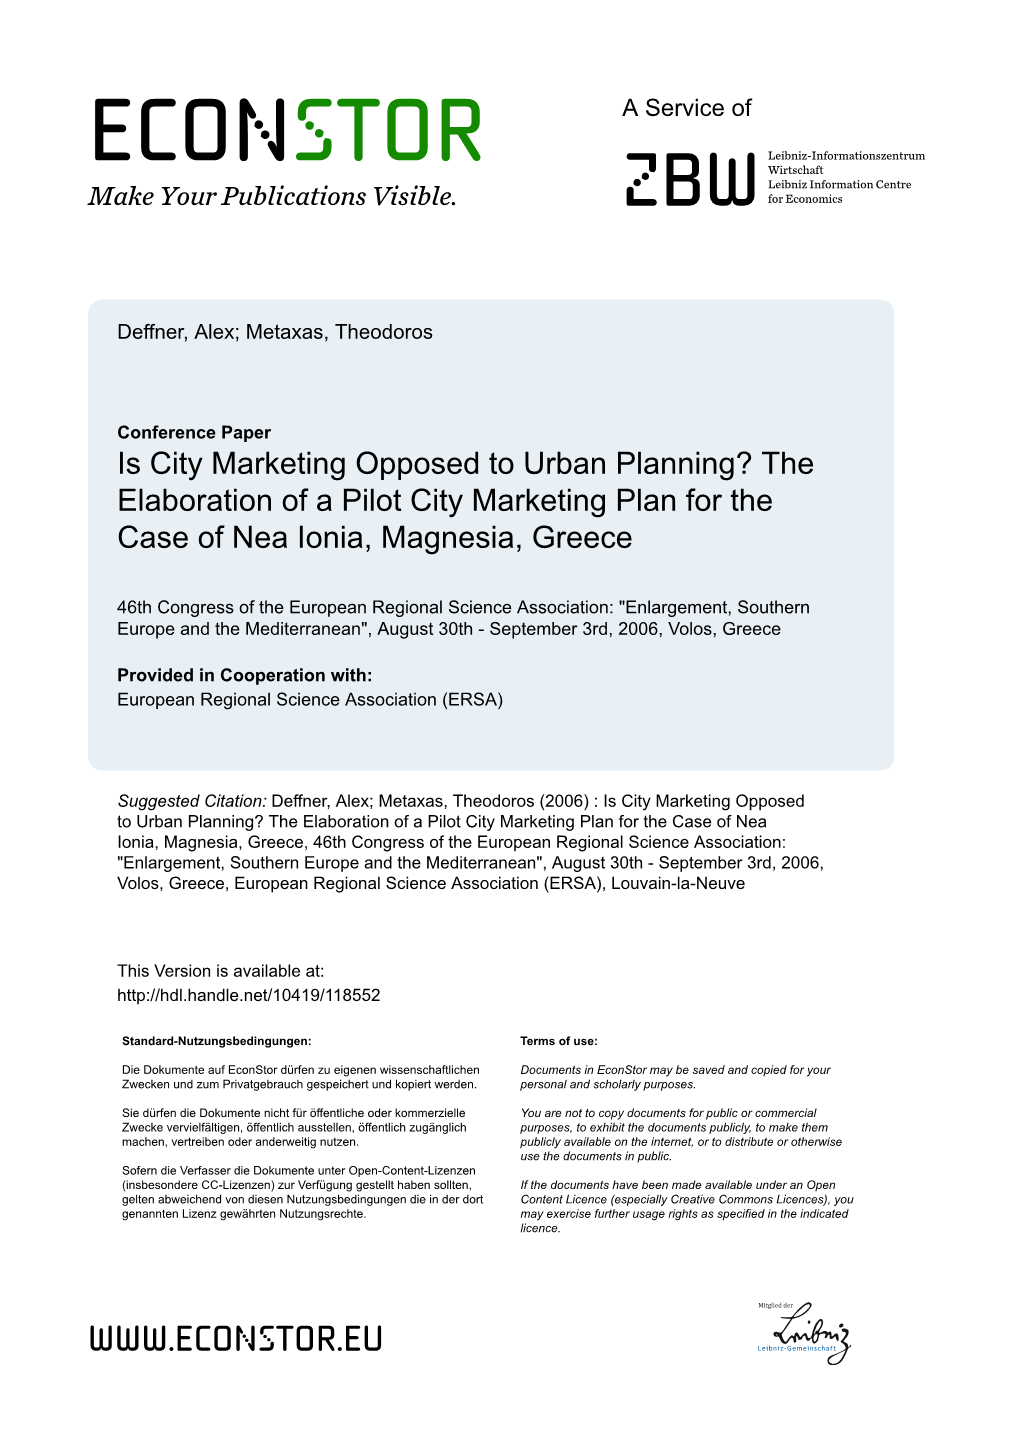 Is City Marketing Opposed to Urban Planning? the Elaboration of a Pilot City Marketing Plan for the Case of Nea Ionia, Magnesia, Greece